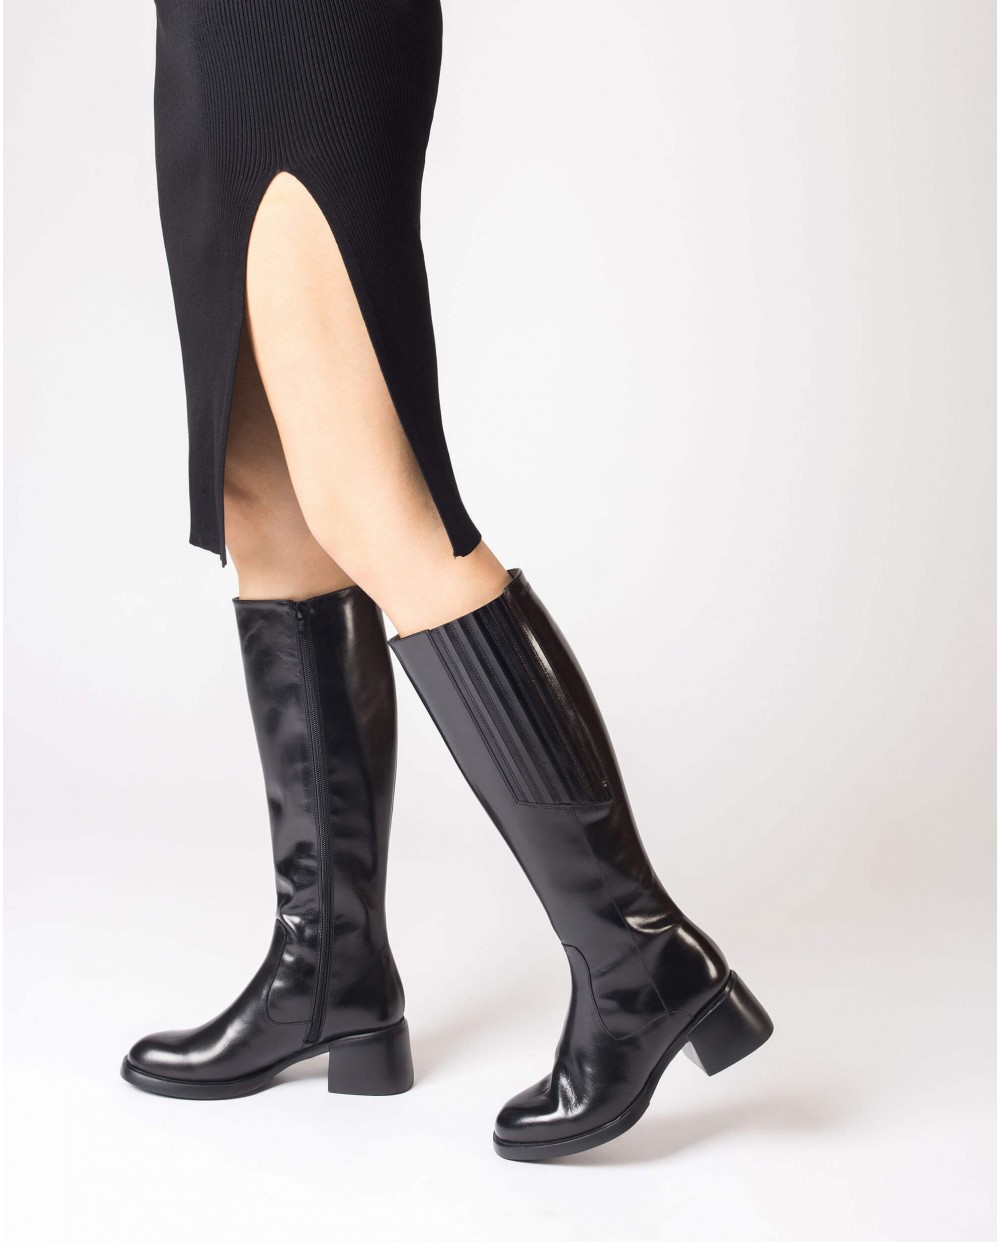 Wonders-Boots-Black FOXIE boots